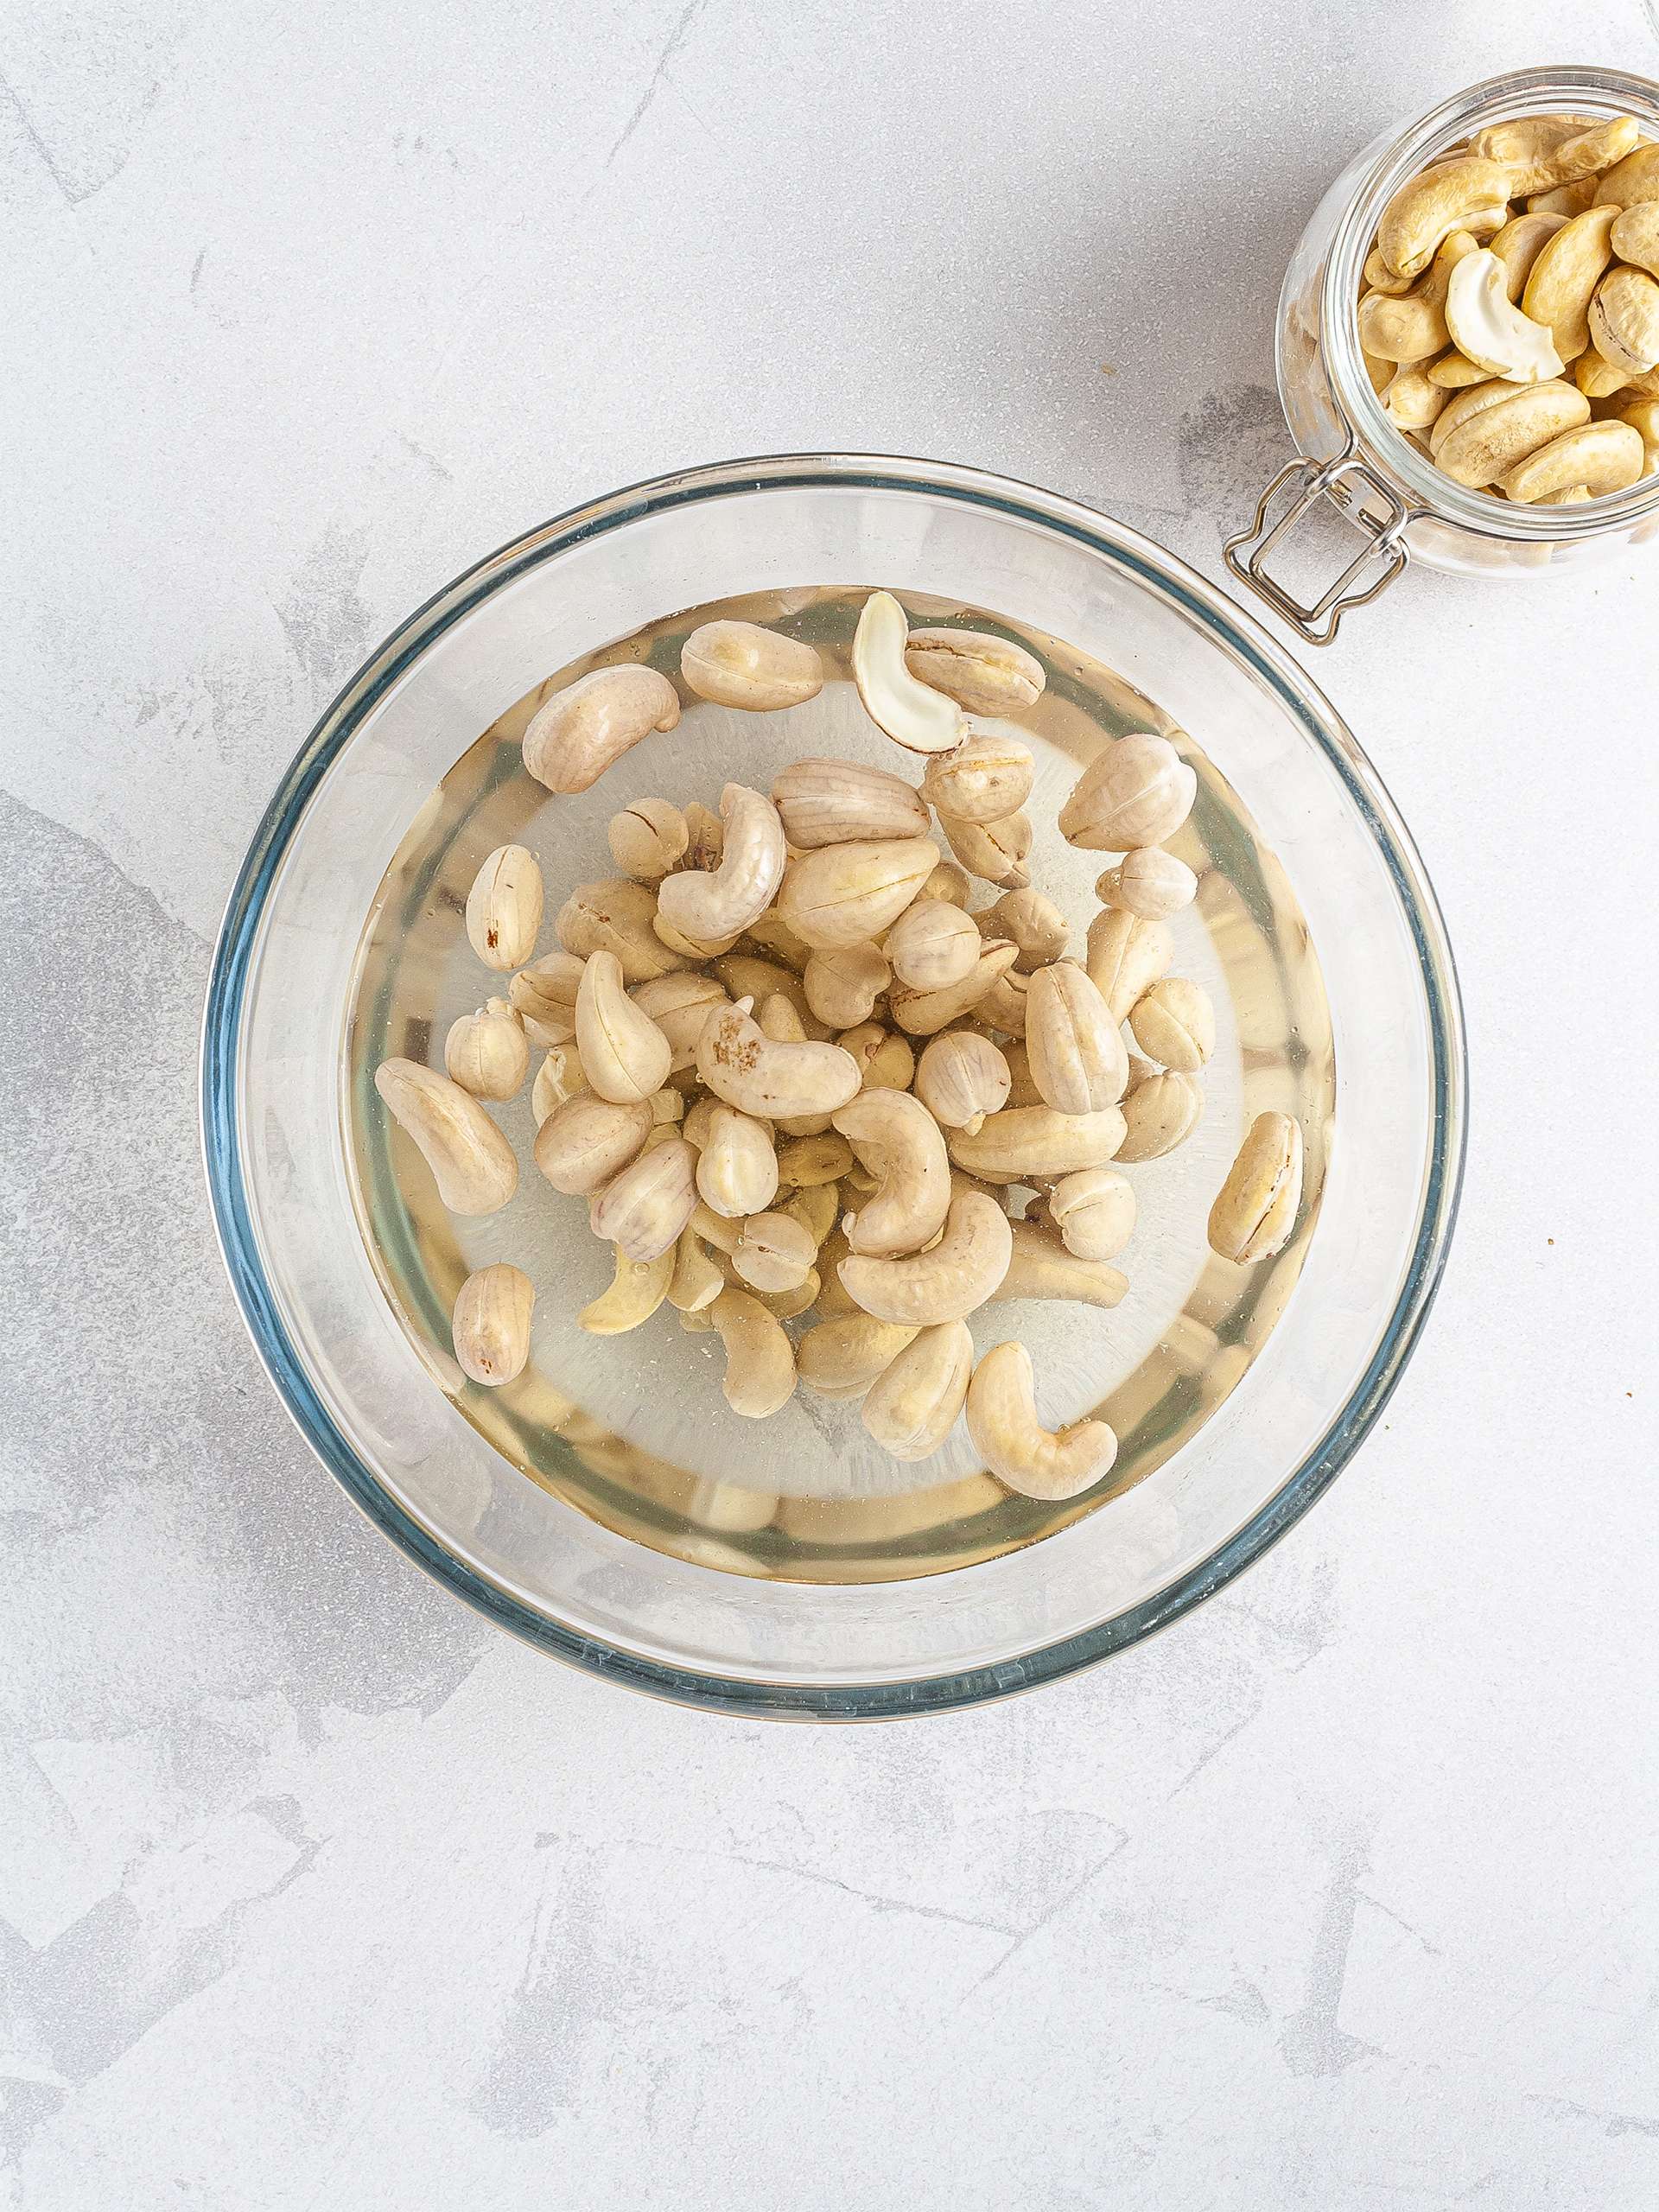 Soaked cashew nuts